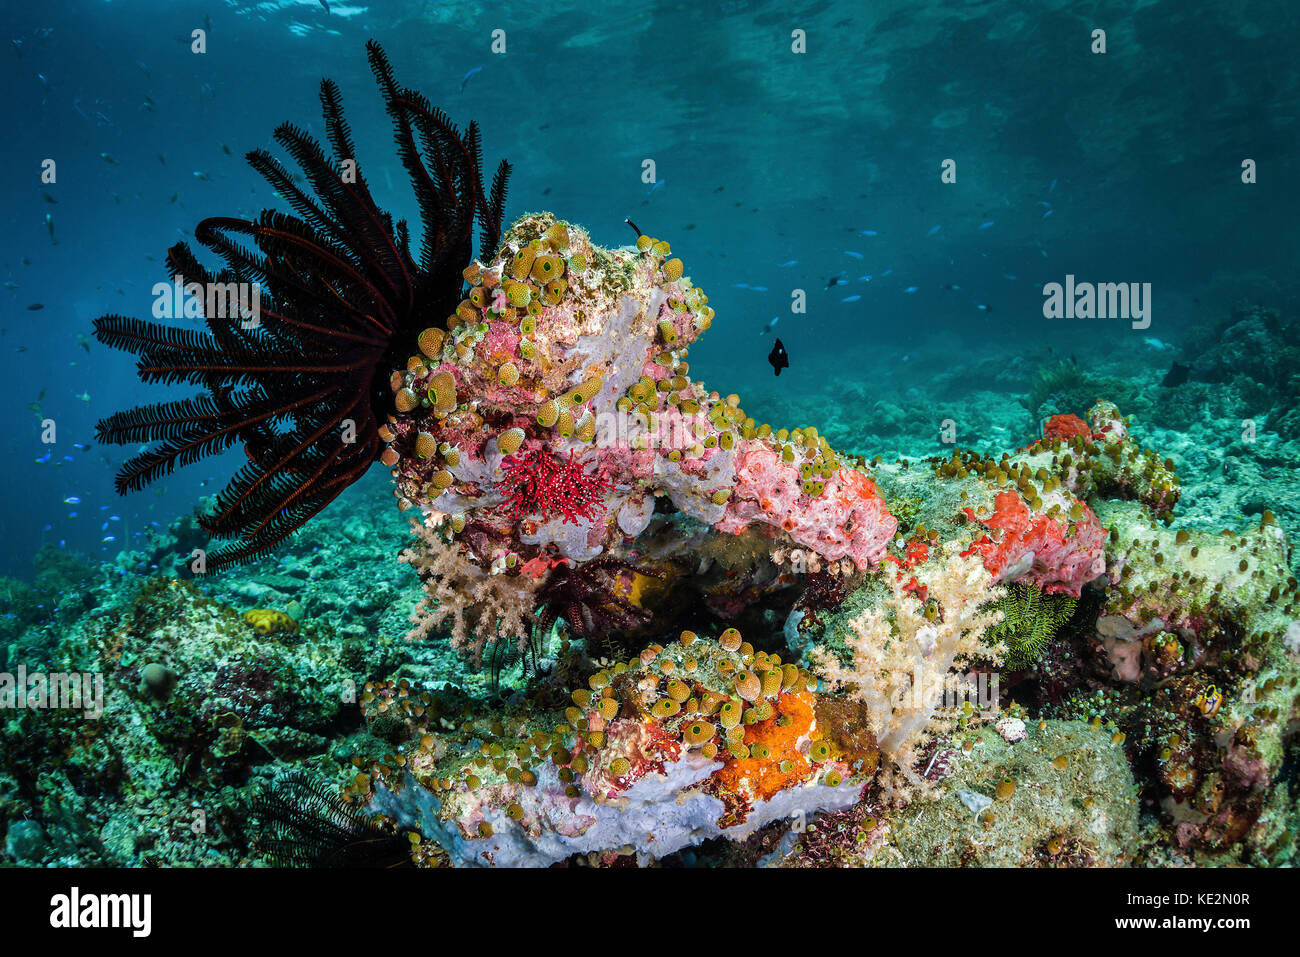 A crinoid and tunicates cover this shallow reef in Raja Ampat, Indonesia. Stock Photo